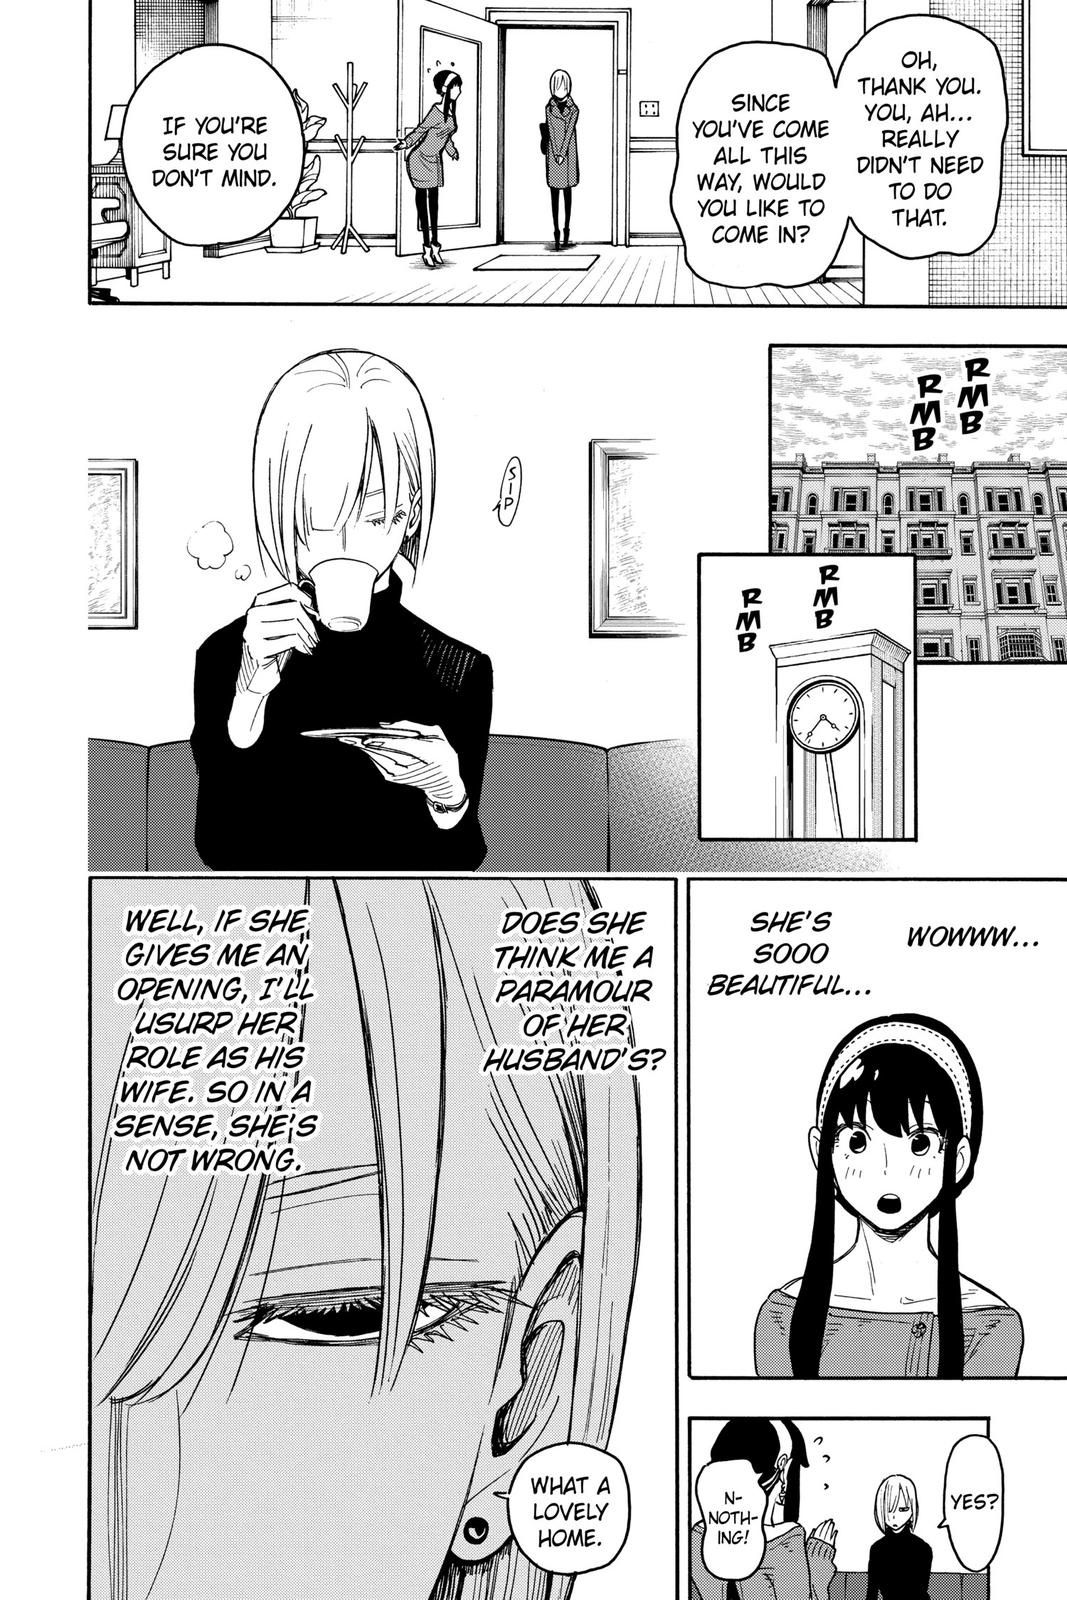 Spy x Family, Chapter 30 image 006